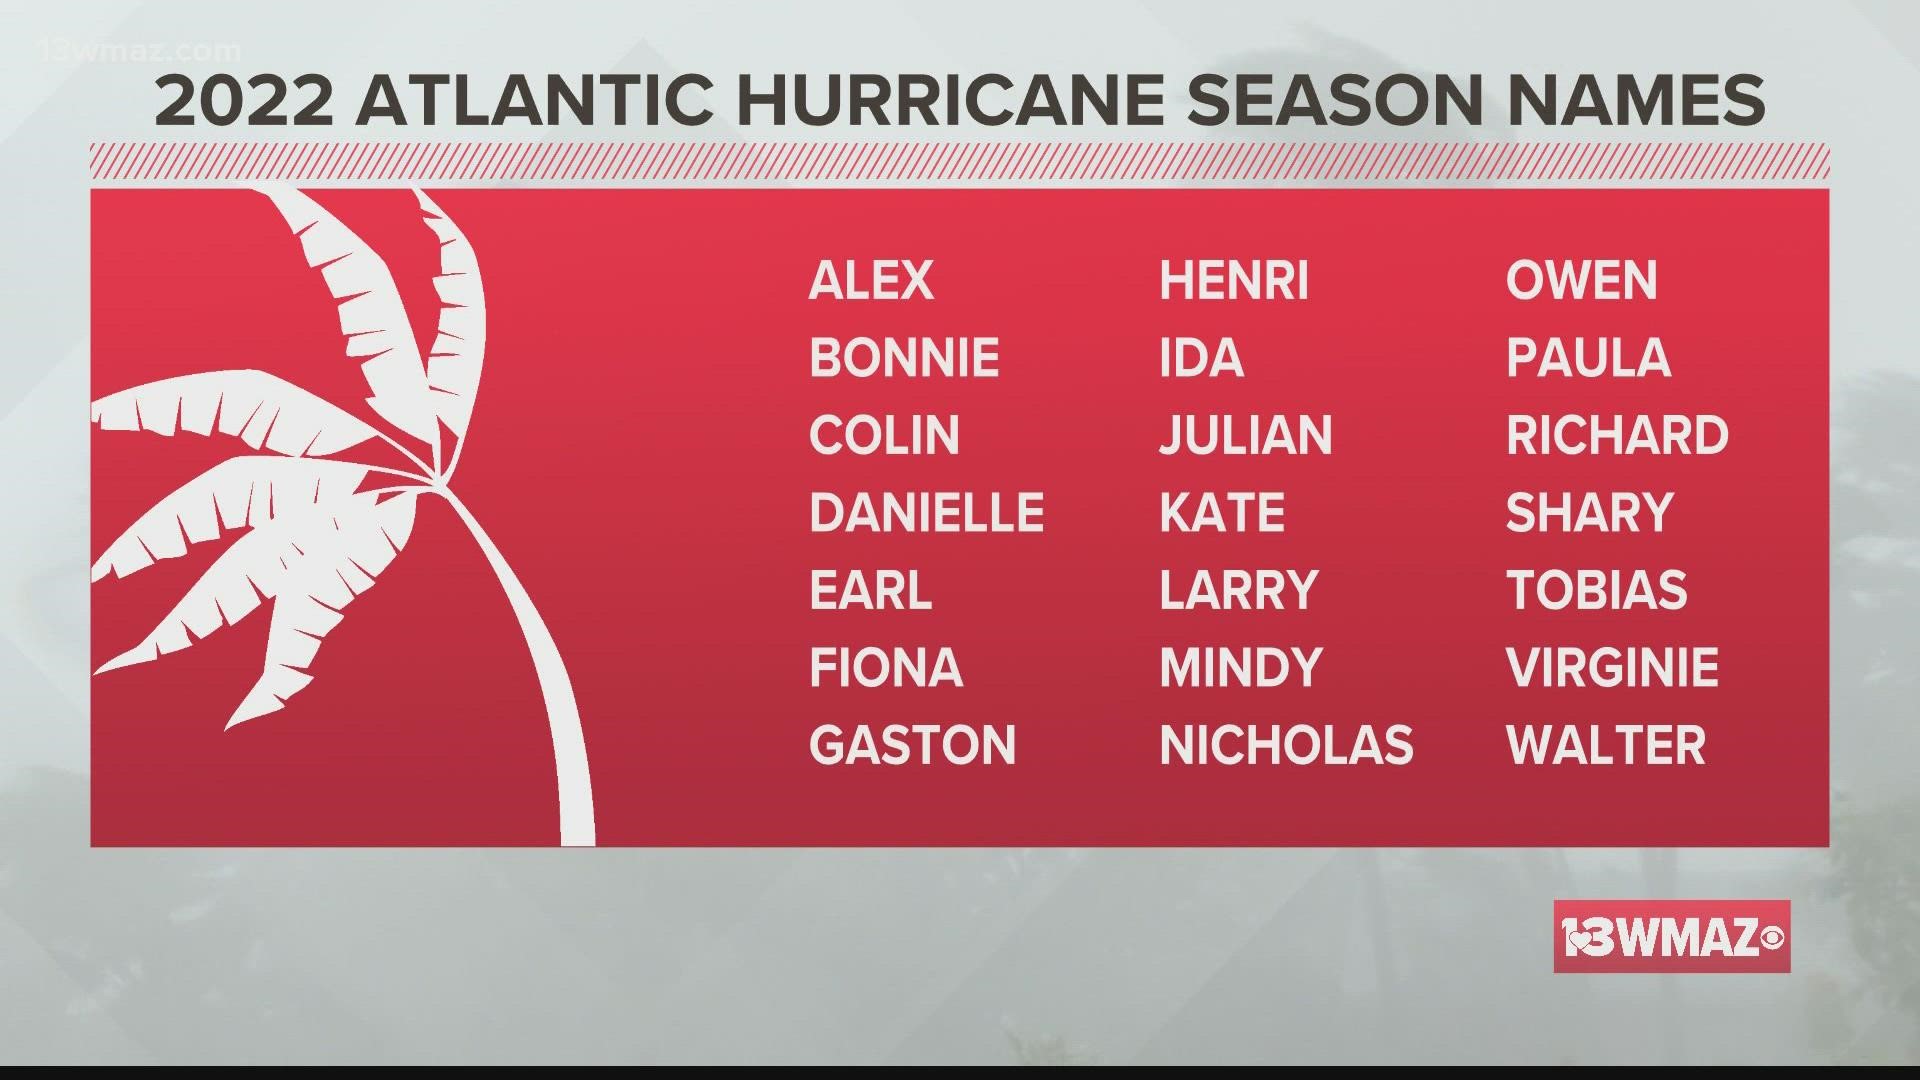 Hurricane season starts promptly on June 1, but the hurricane naming system goes back hundreds of years.